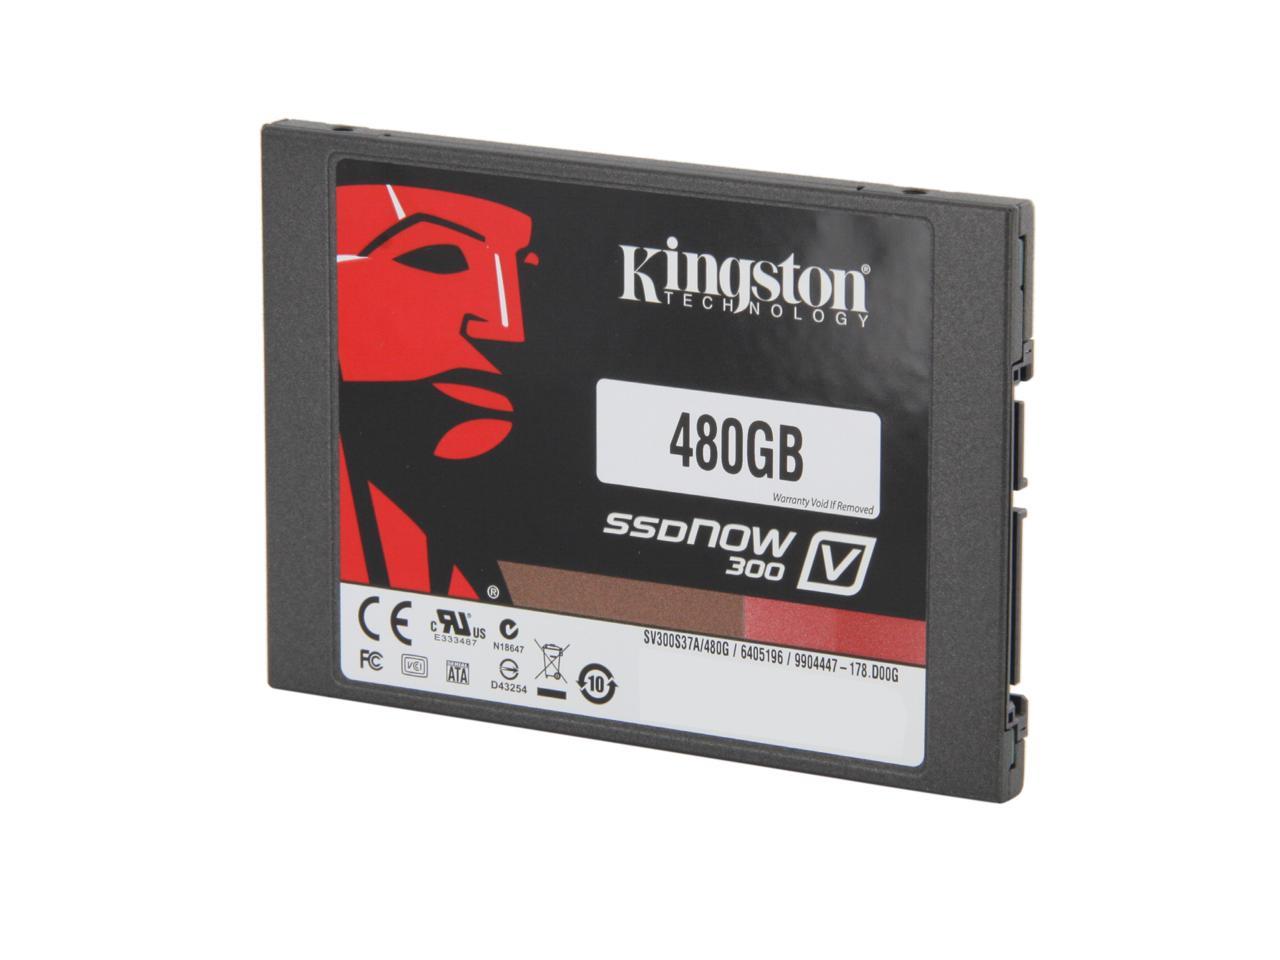 courtyard Suffix cough Kingston SSDNow V300 Series 2.5" 480GB SATA III Internal Solid State Drive ( SSD) SV300S37A/480G - Newegg.com